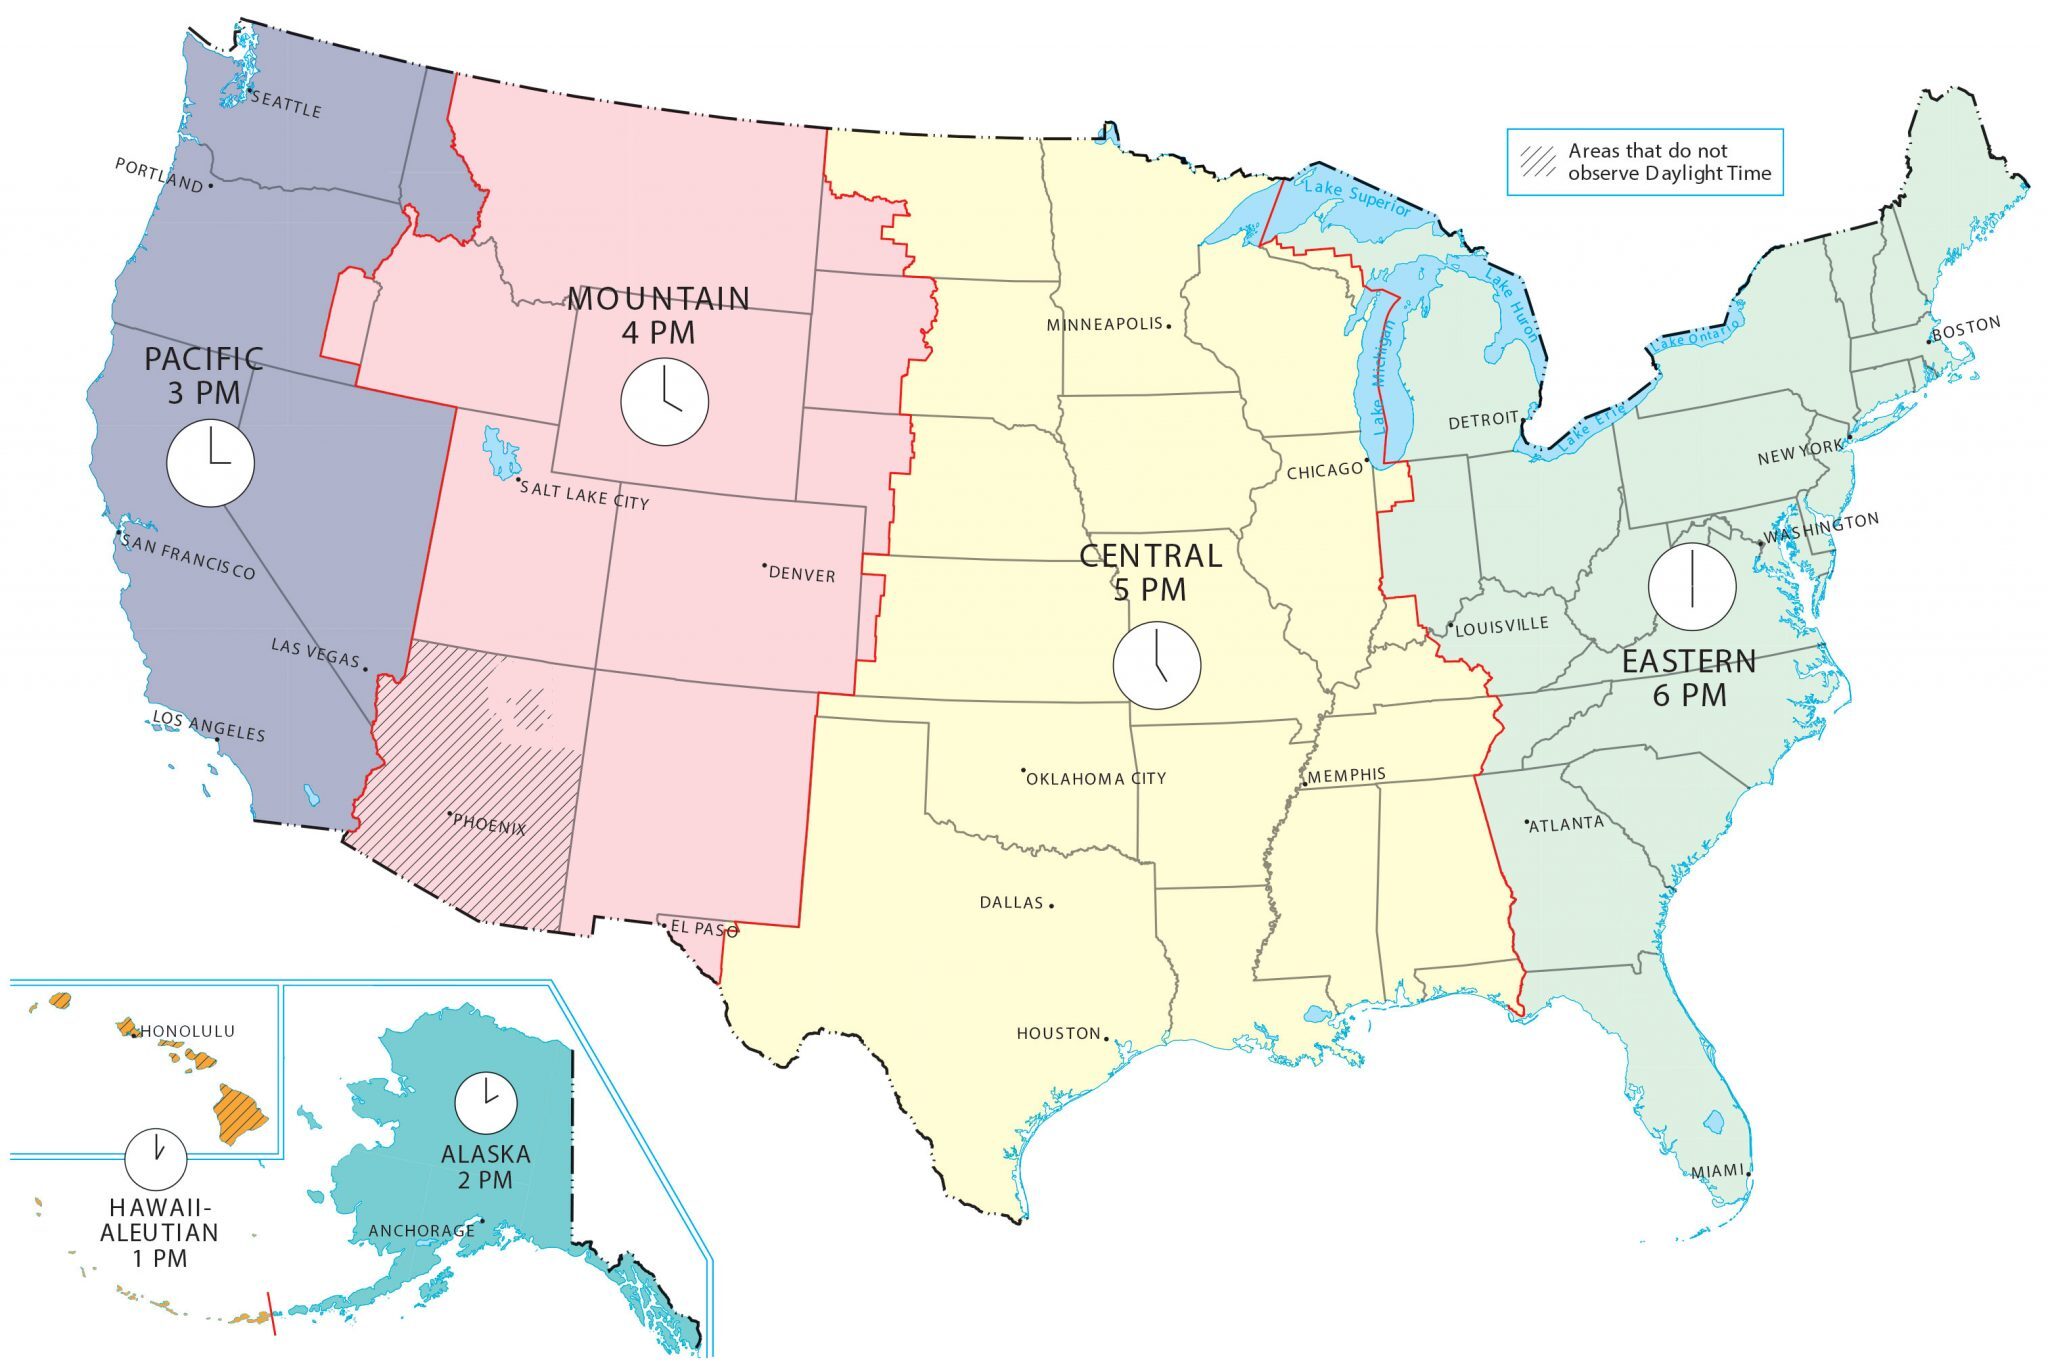 map of usa time zones